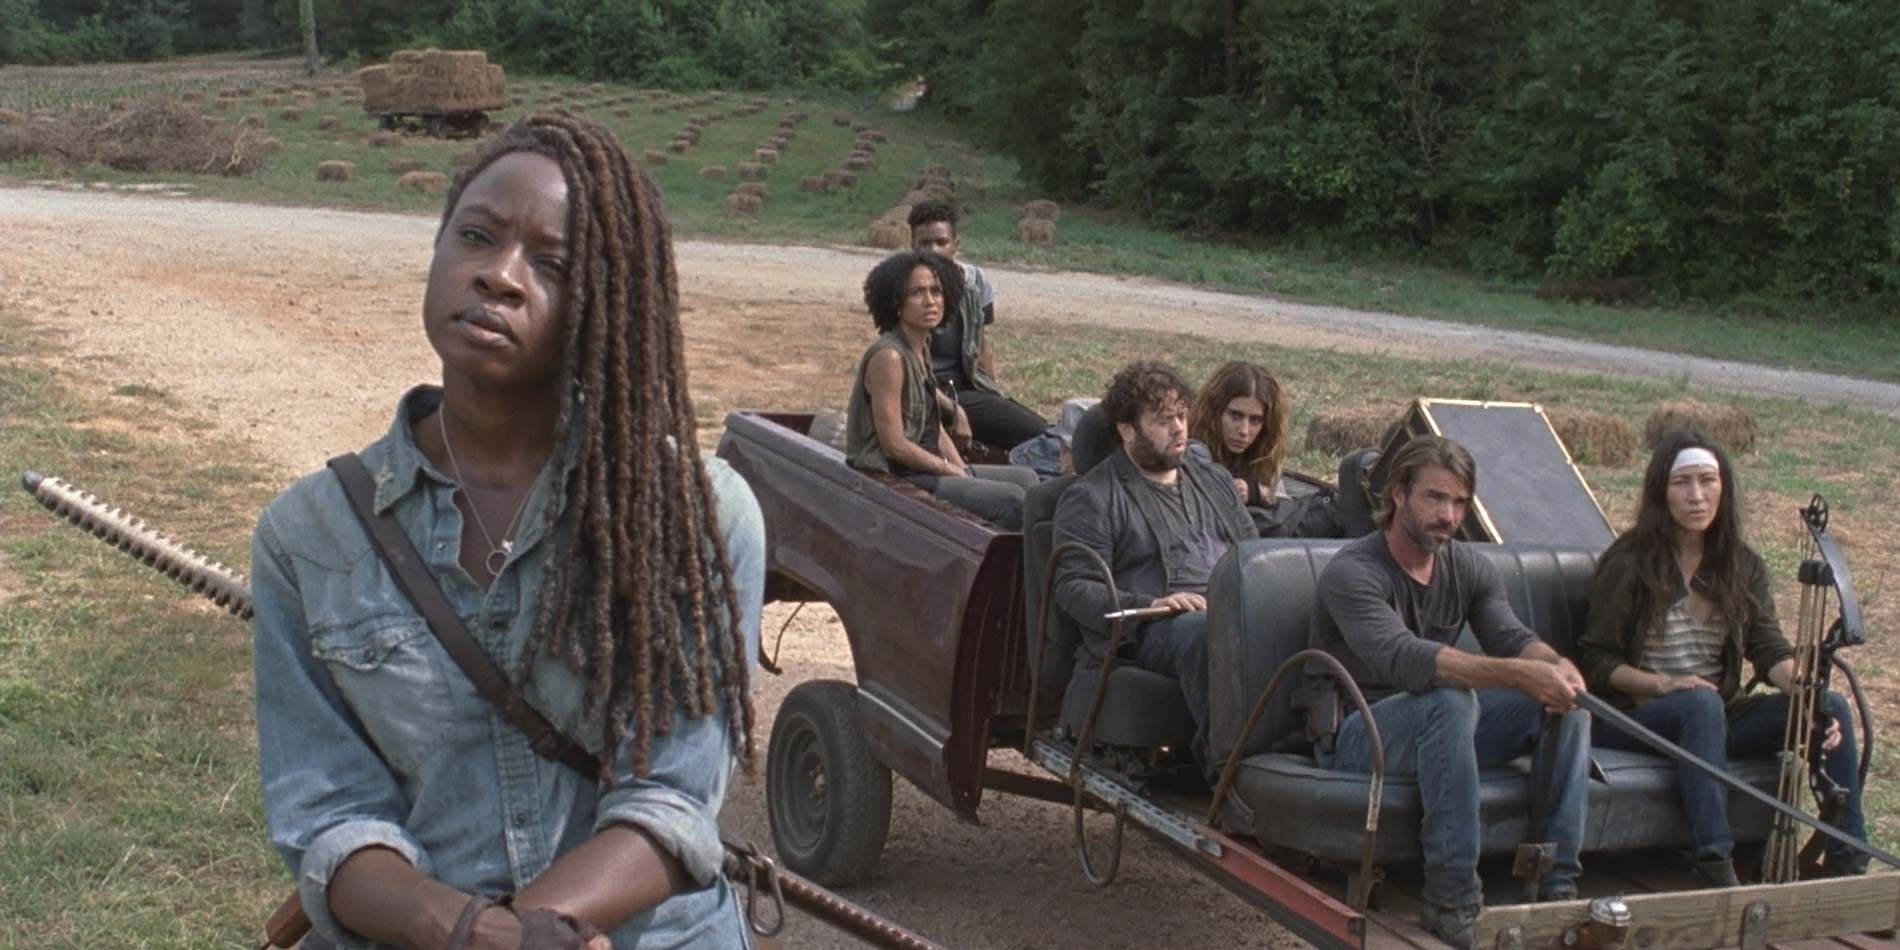 Danai Gurira as Michonne and Magna's Group in The Walking Dead